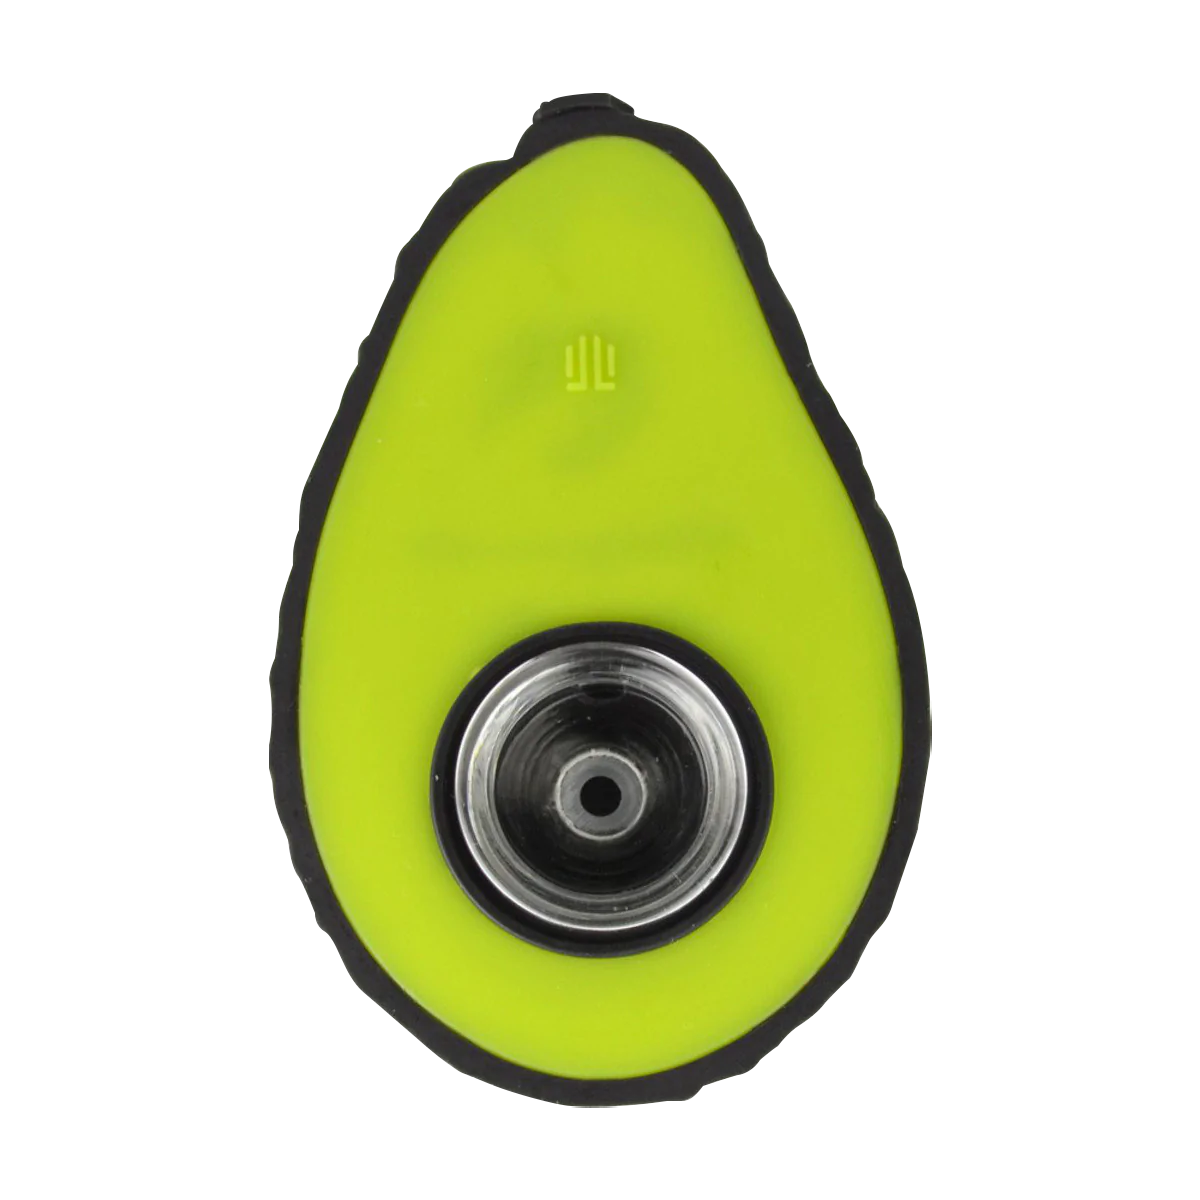 Compact silicone avocado-shaped hand pipe with removable glass bowl, top view on white background